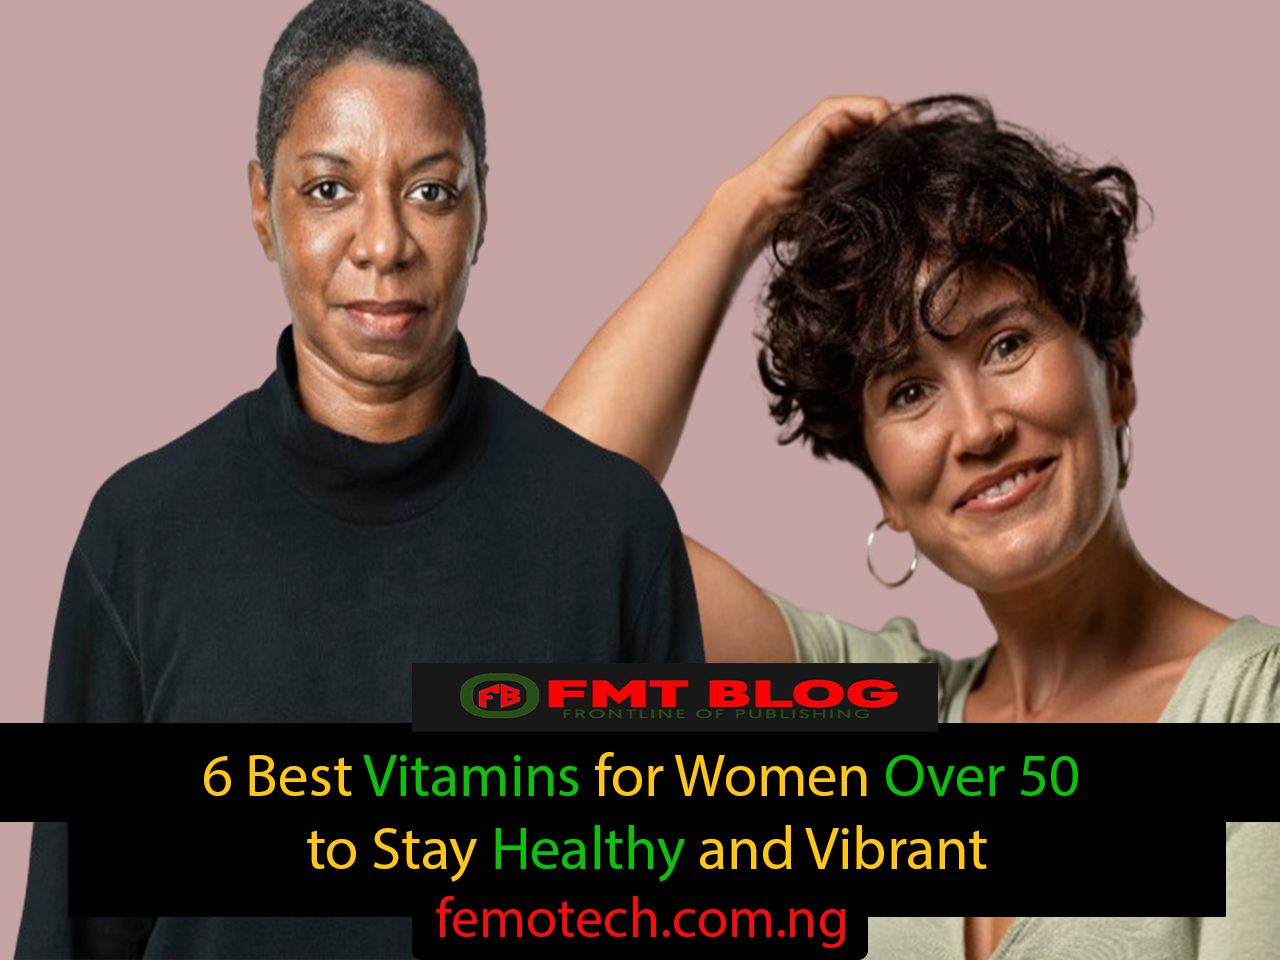 6 Best Vitamins for Women Over 50 to Stay Healthy and Vibrant